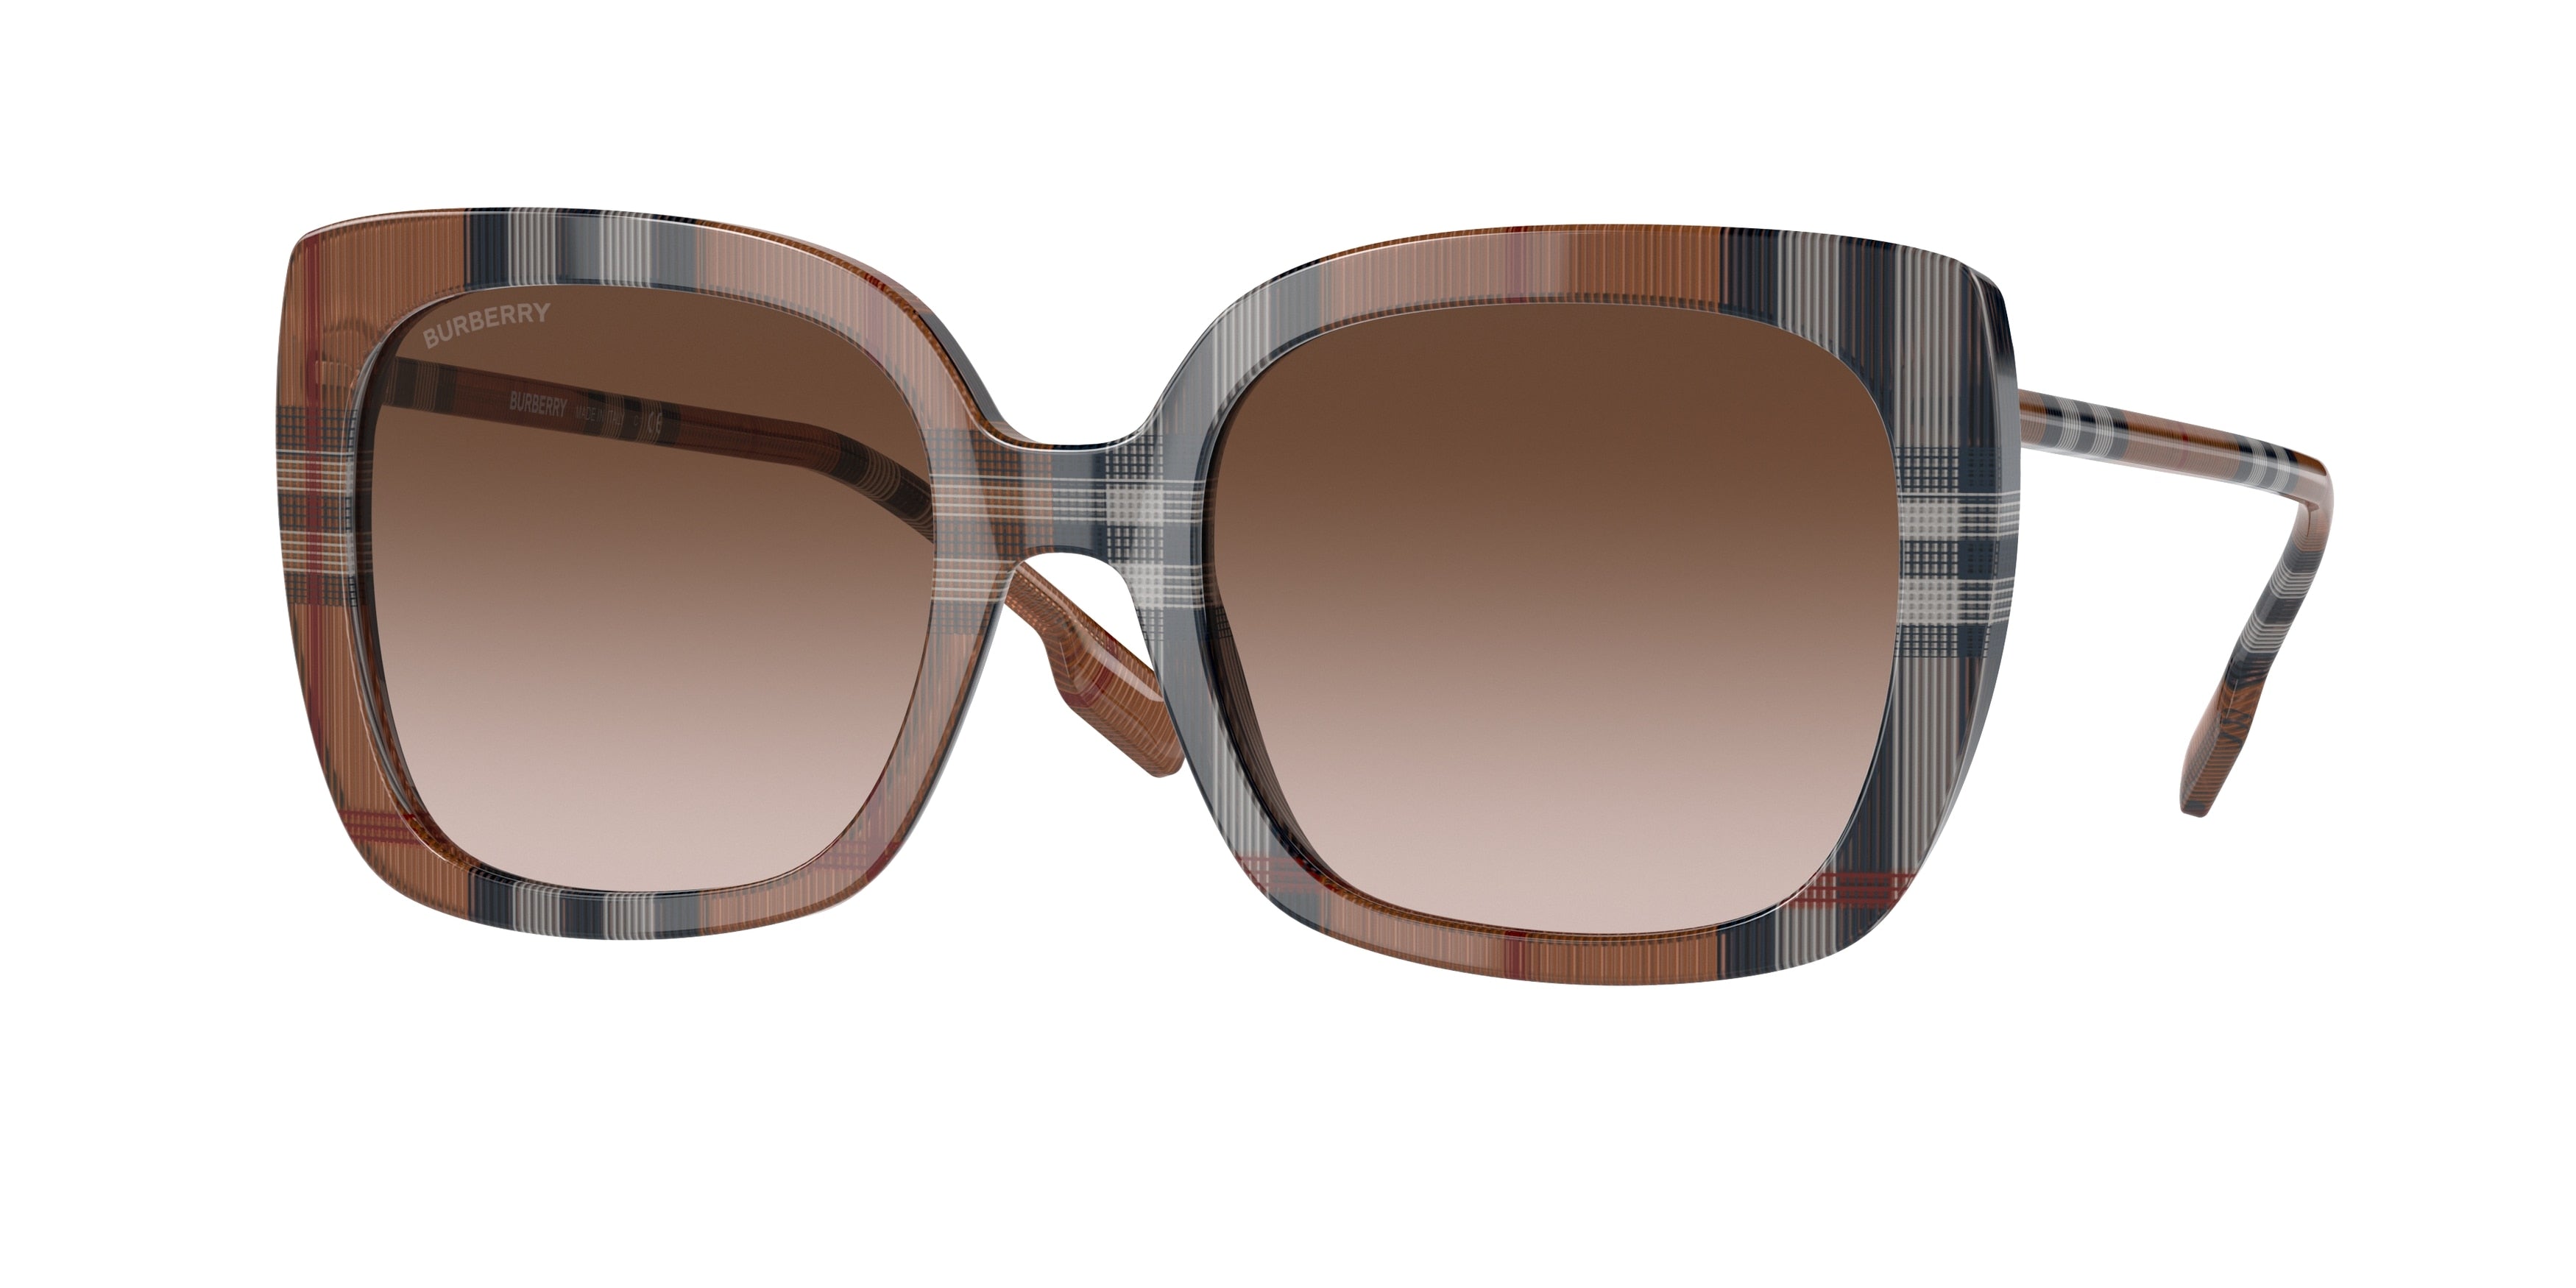 Burberry CAROLL BE4323 Square Sunglasses  400513-Brown Check 54-140-20 - Color Map Brown